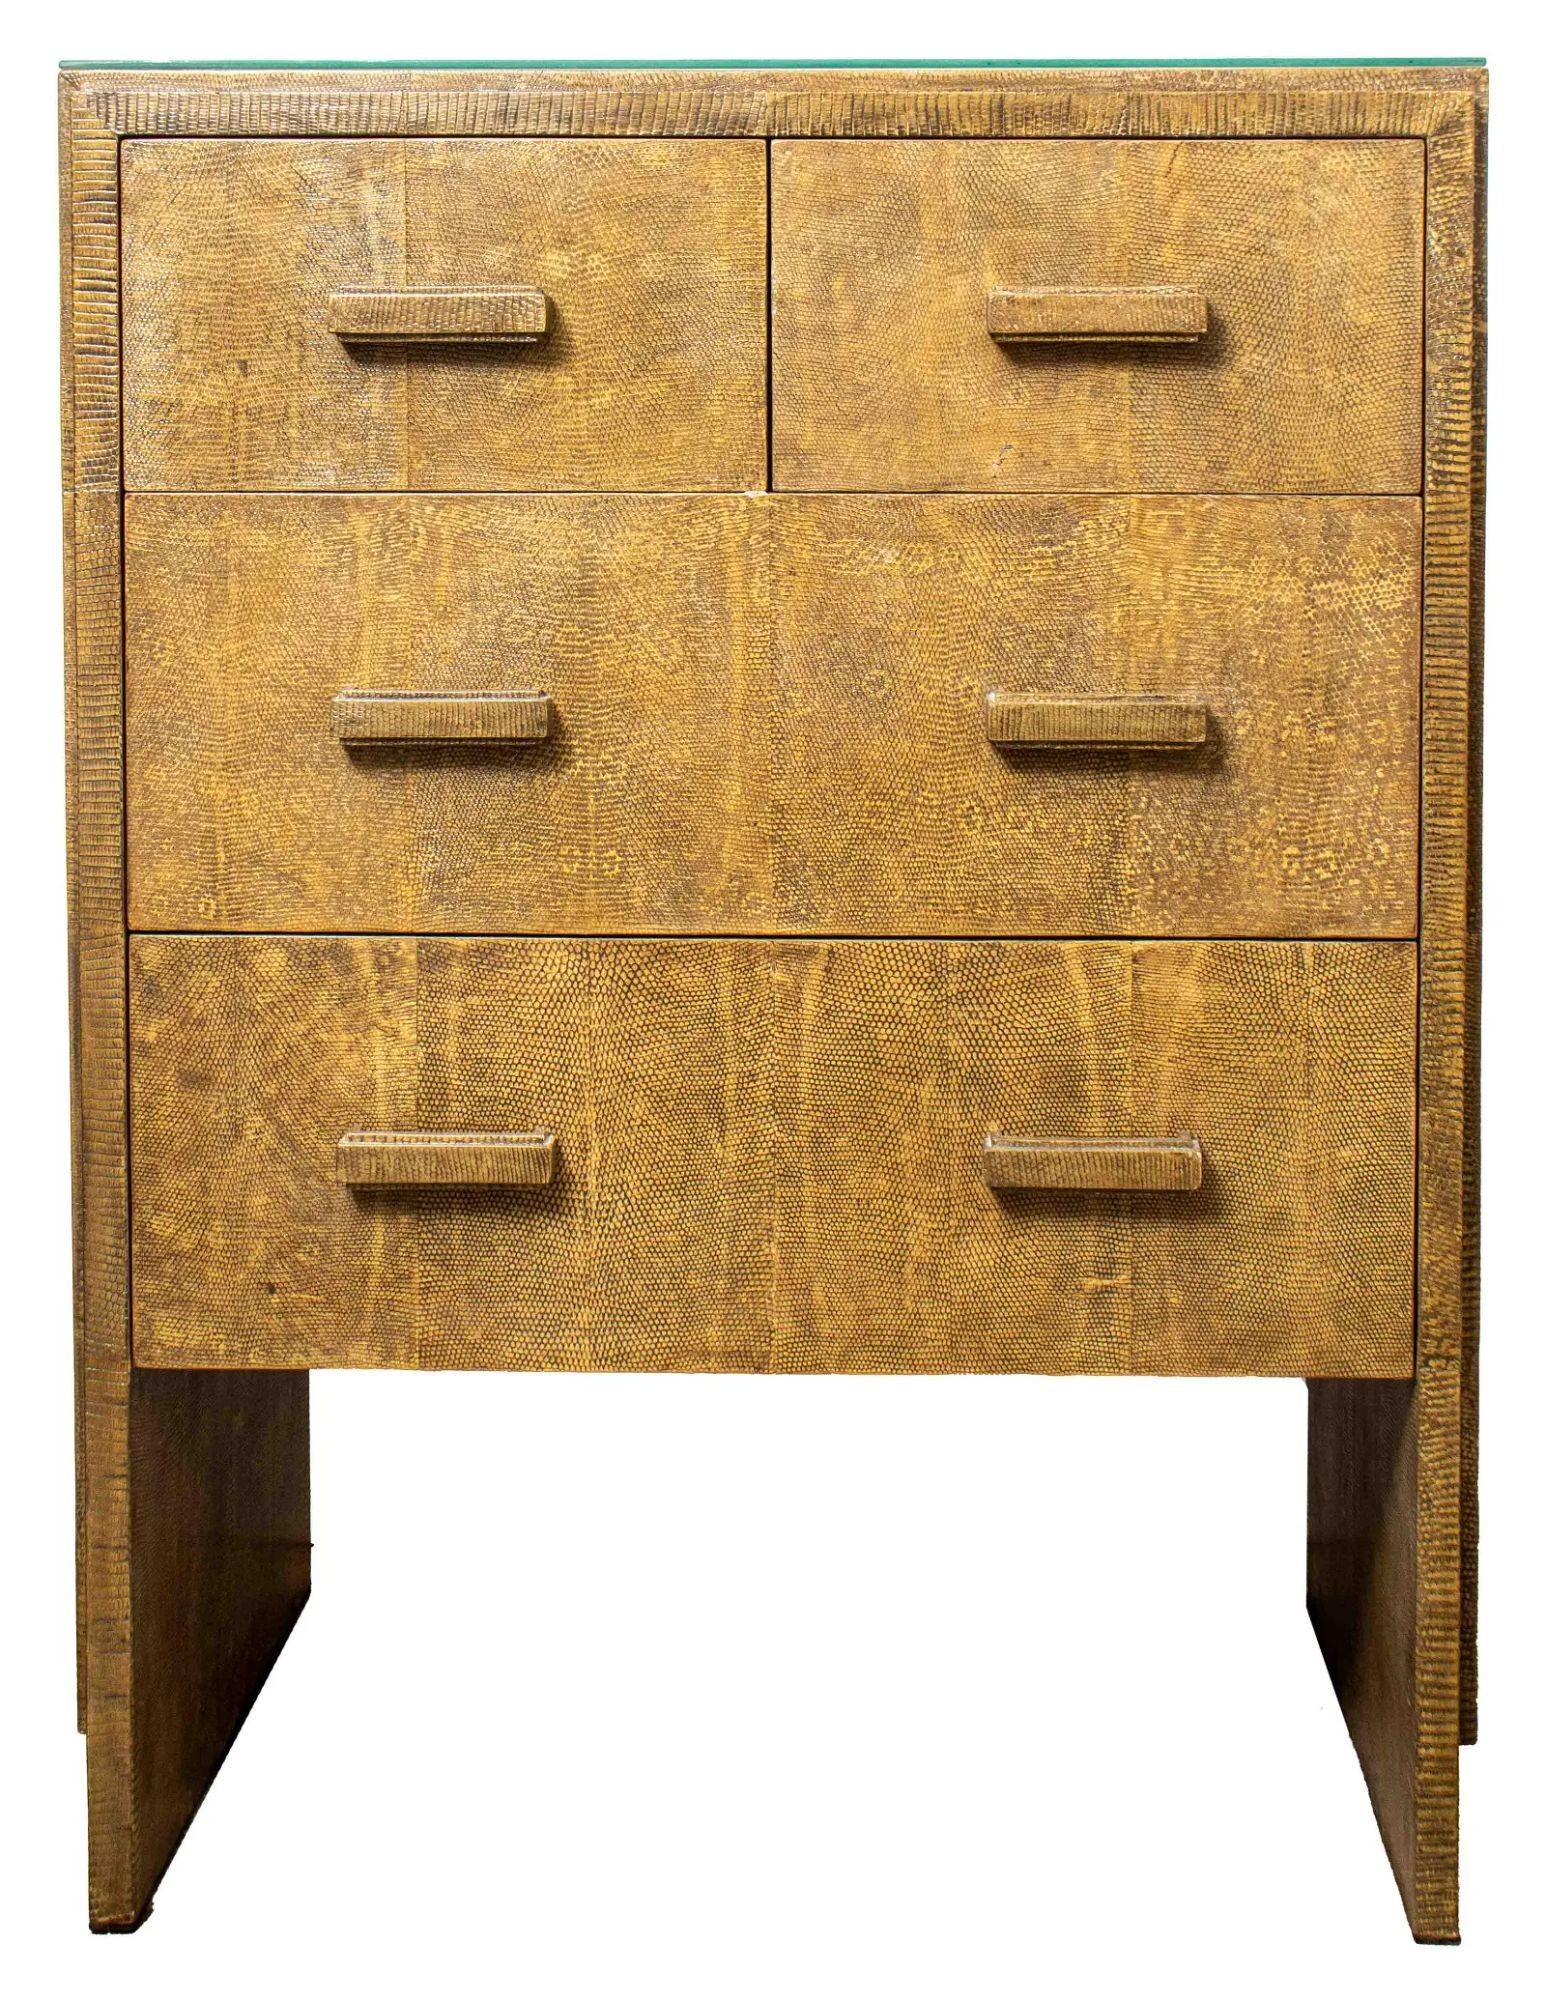 R & Y Augousti Paris modern snakeskin dresser with glass top, two short drawers over two long drawers. 42.25